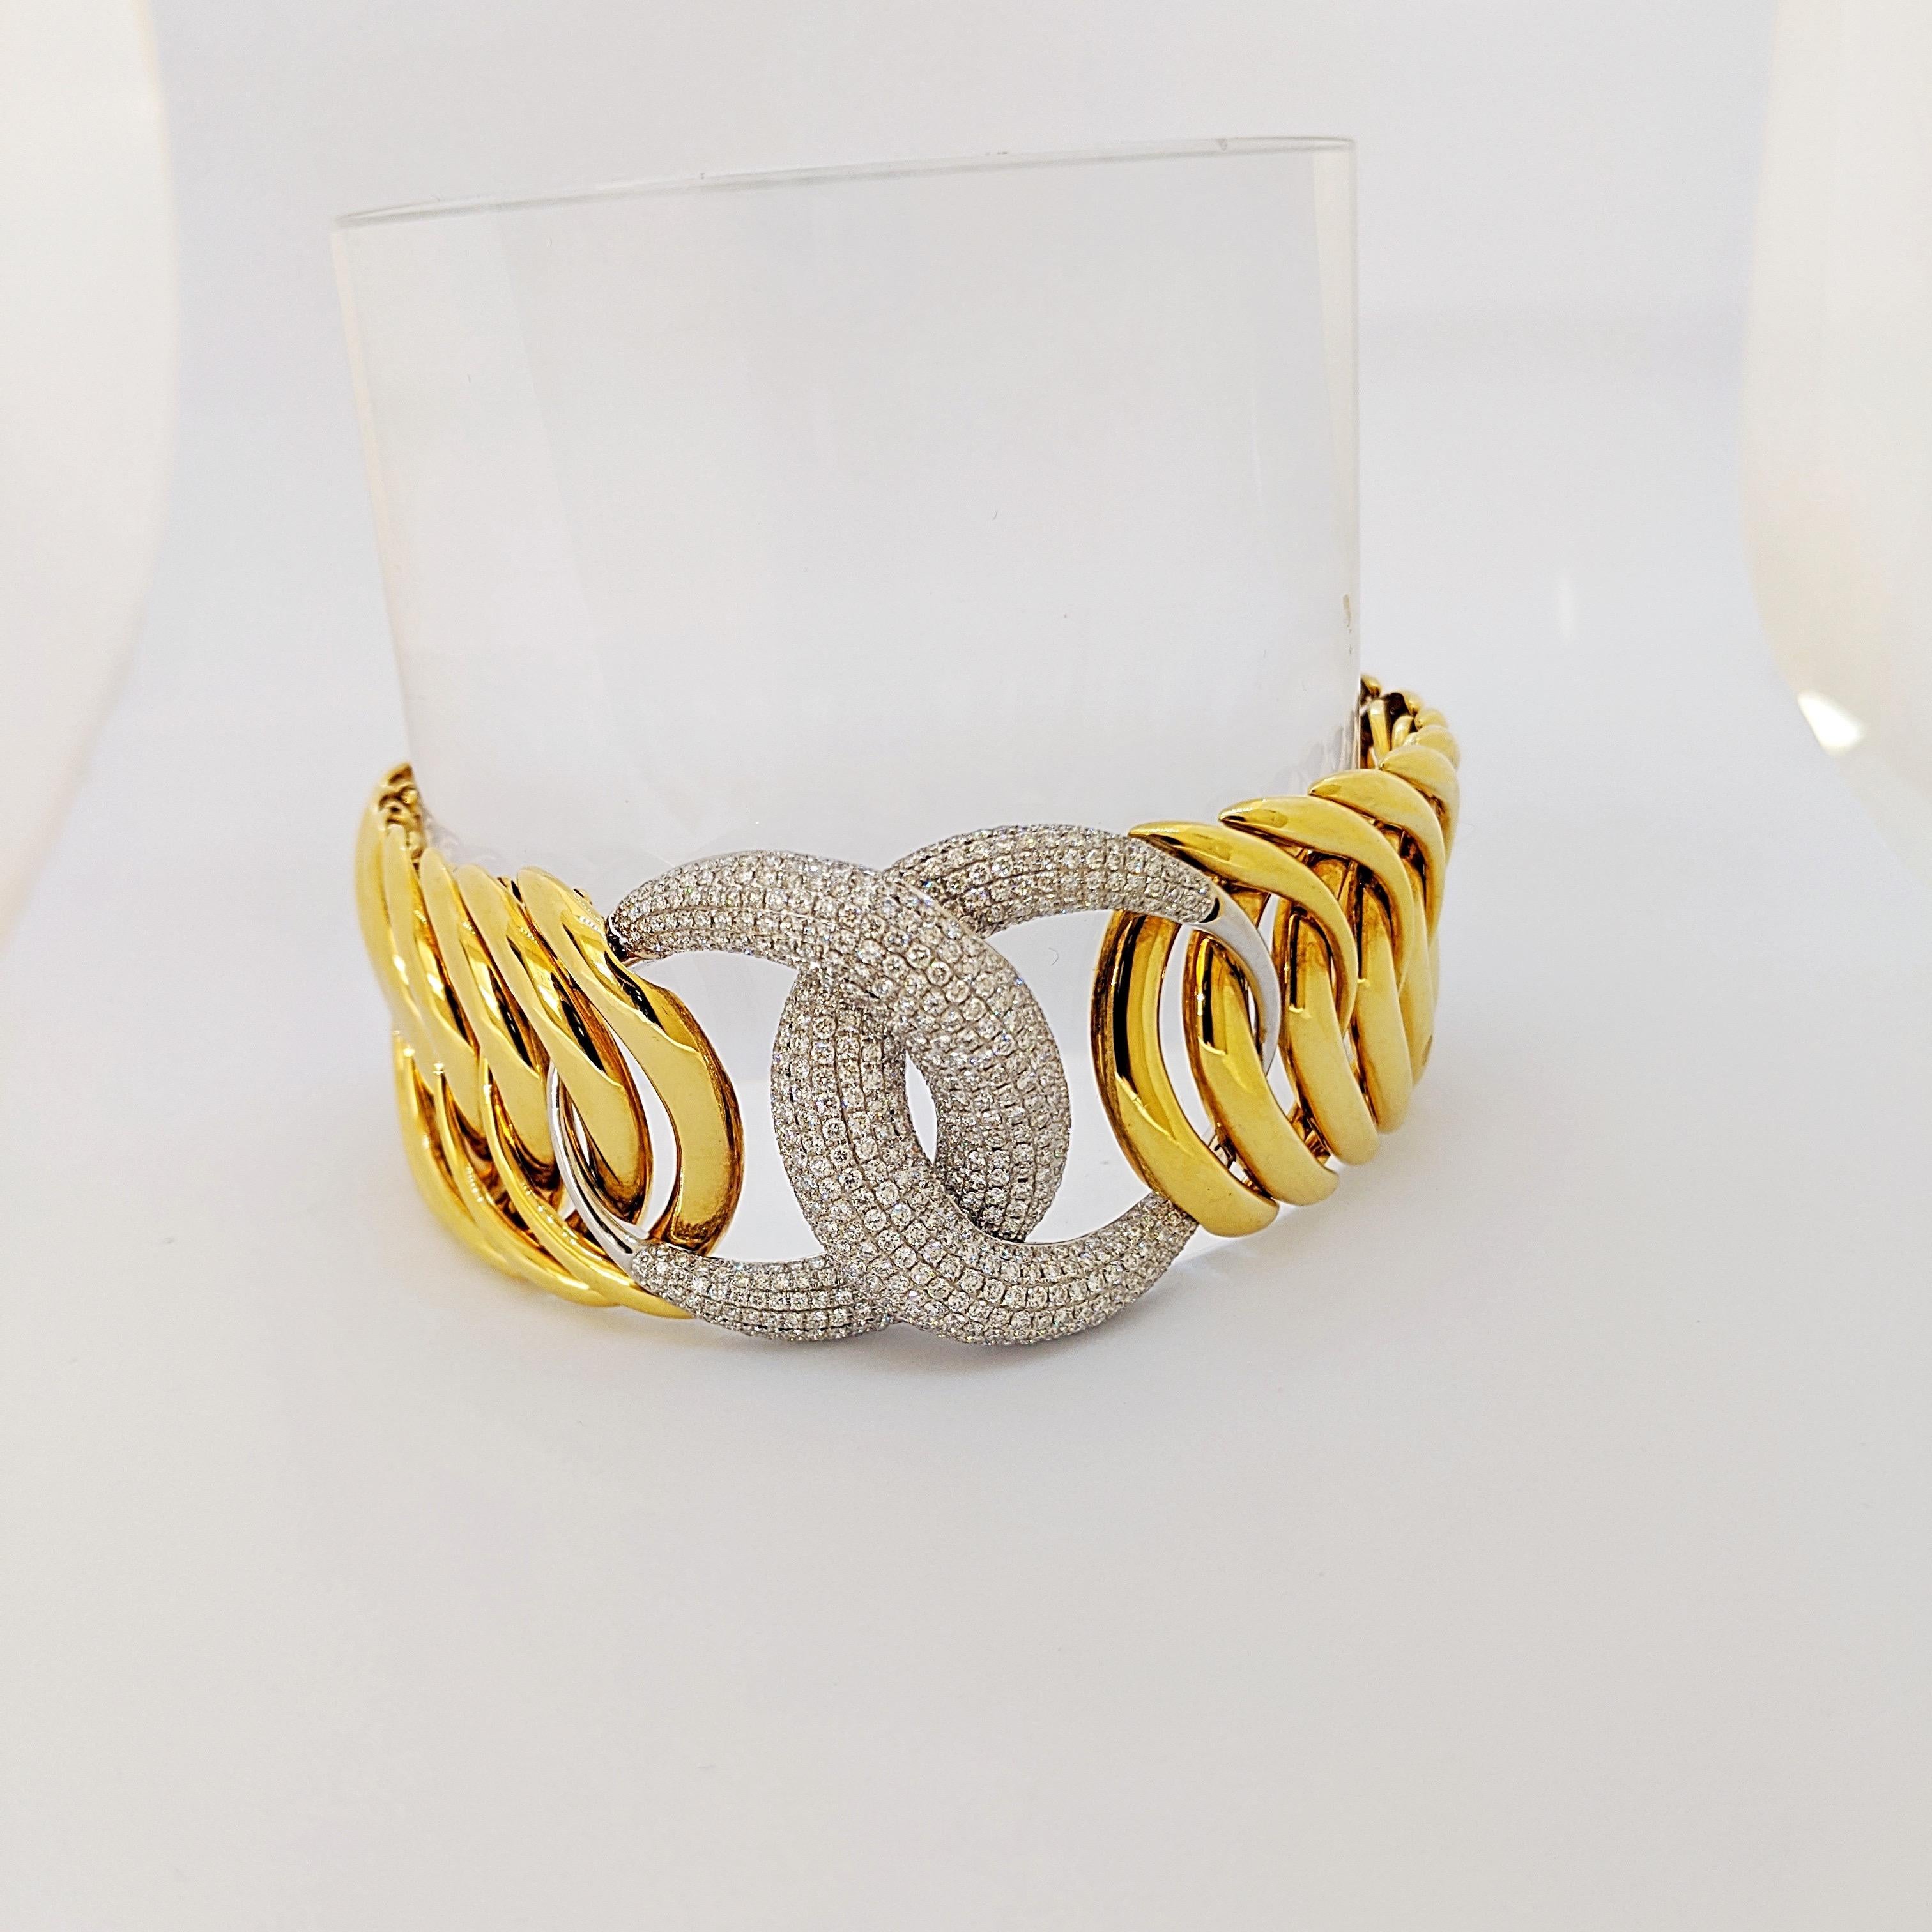 Designed for Cellini. The centerpiece of this lovely bracelet is the two interlocking pave diamond set crescent moons .The pattern continues with the hi polished yellow gold interlocking links. When closed the bracelet is seamless. The bracelet